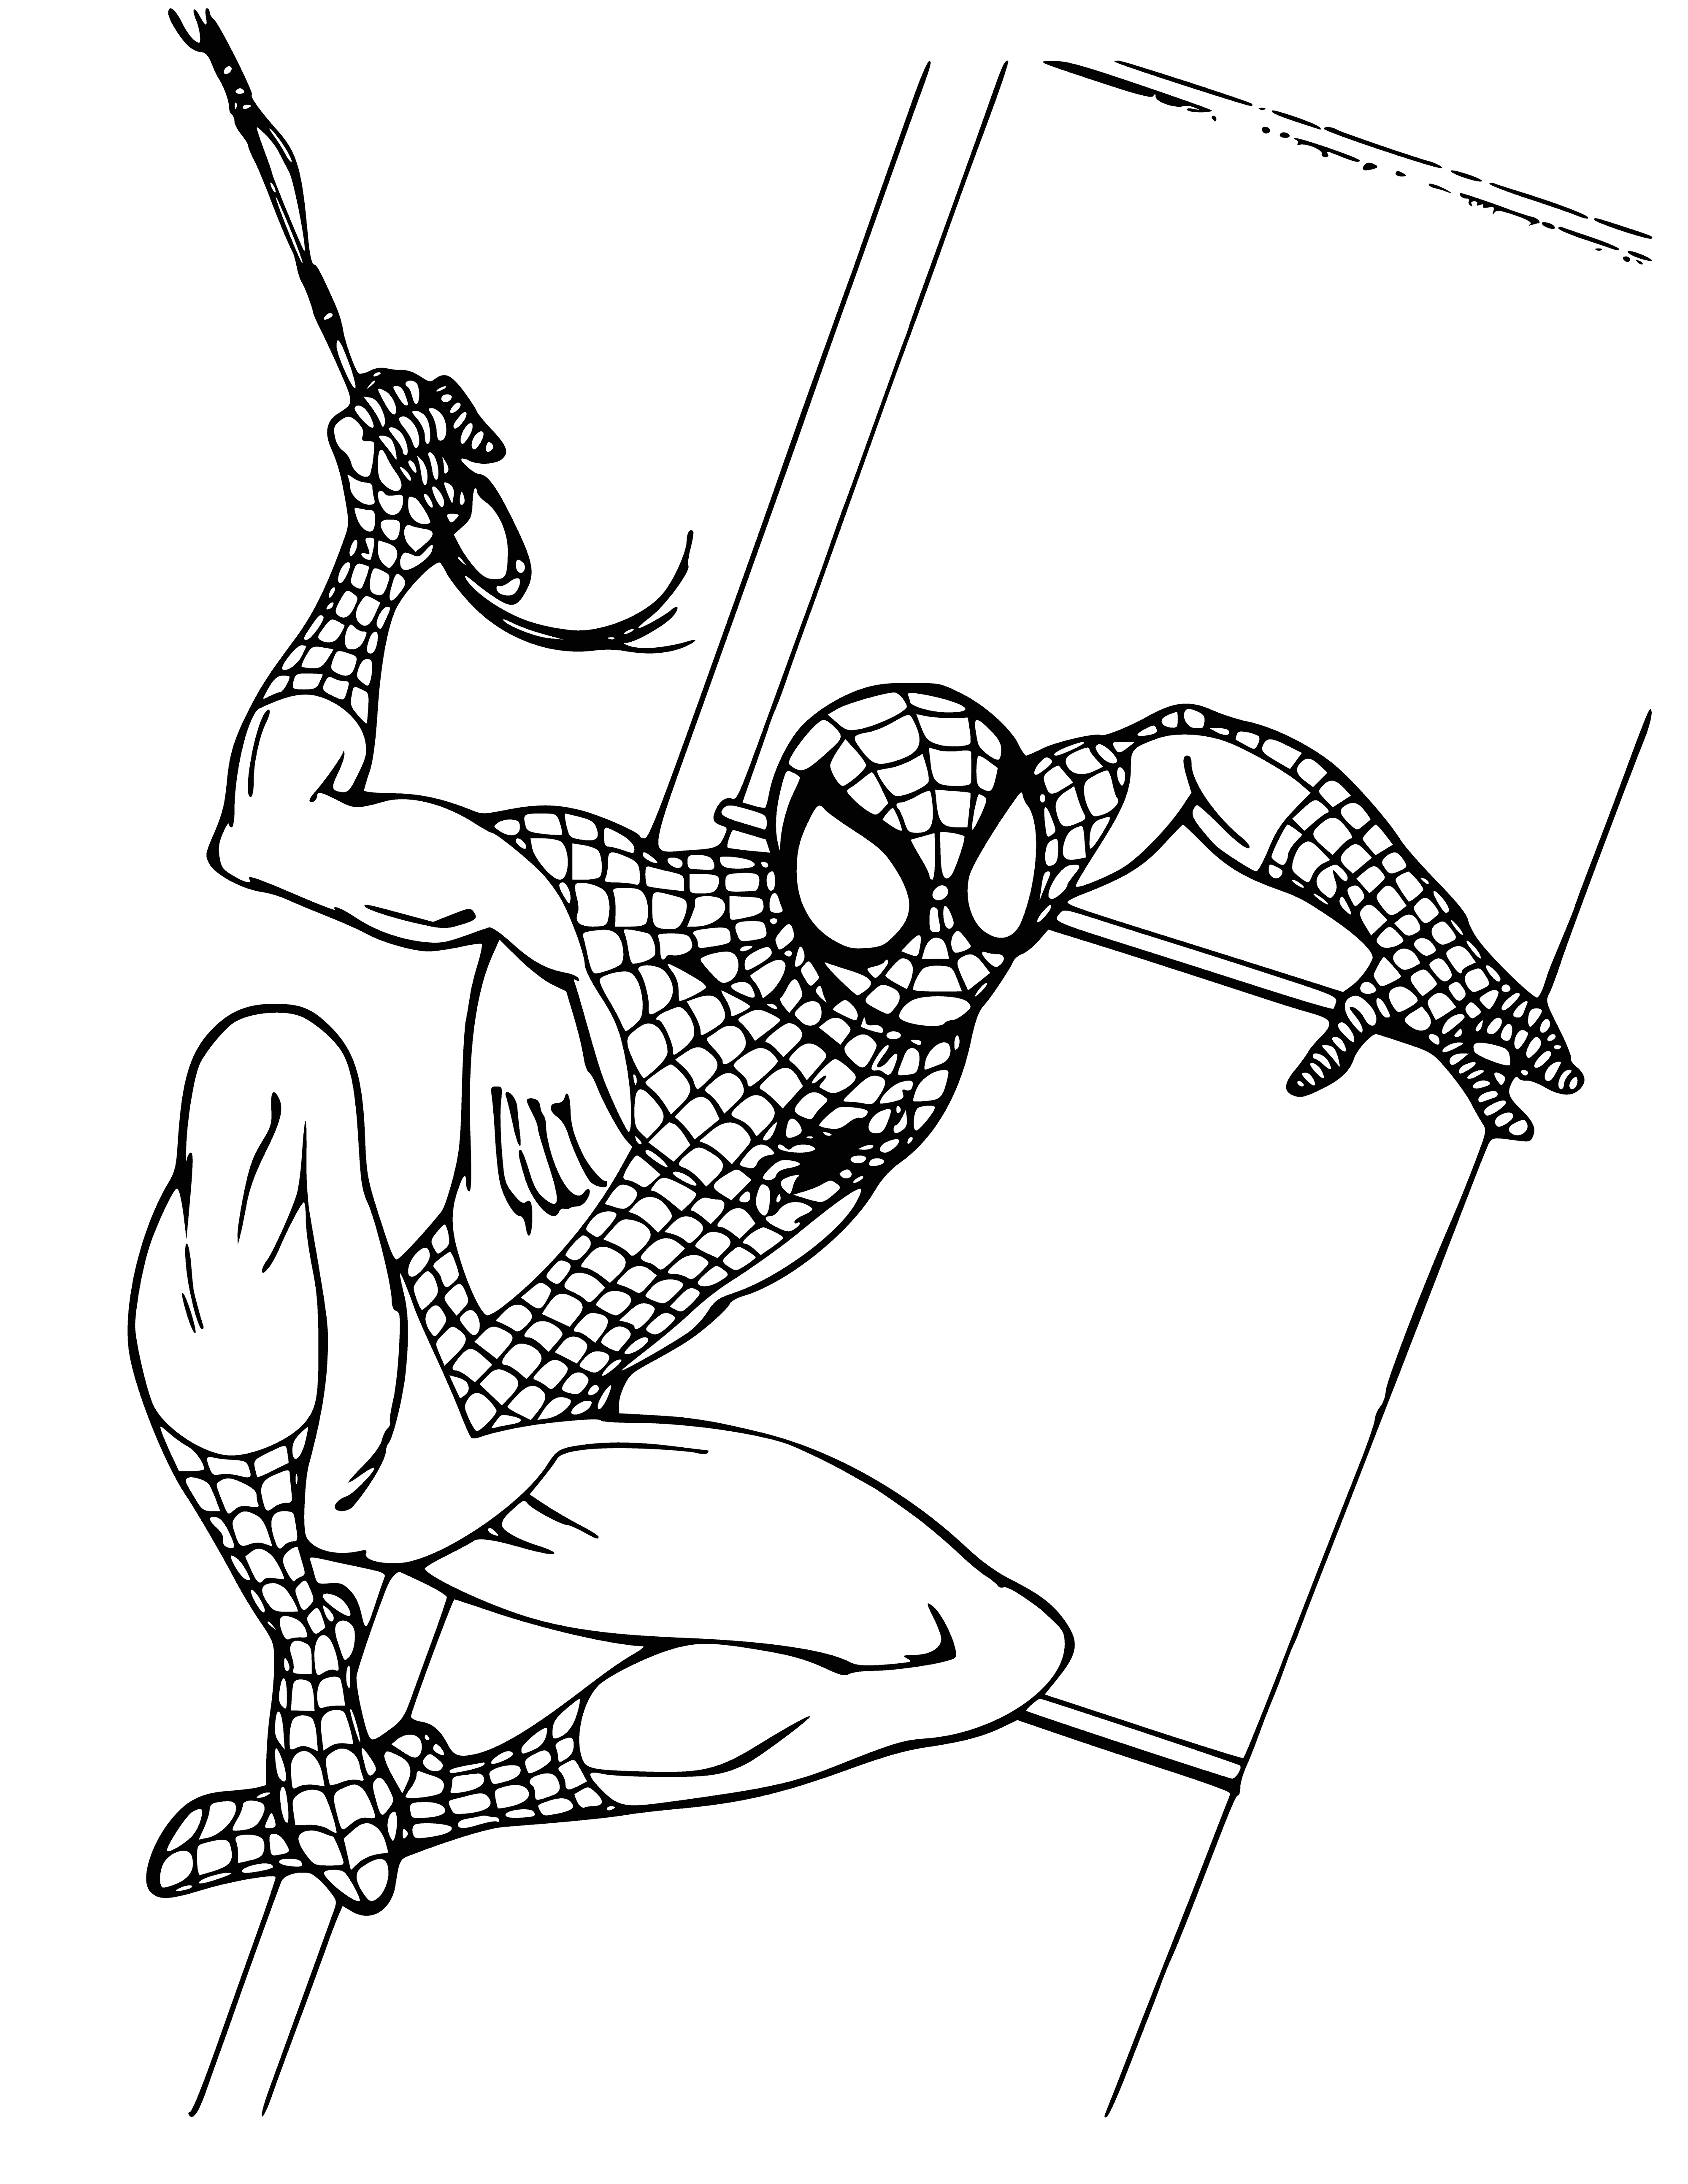 coloring page: Man in spider suit hangs from building, gripping edge with hands & feet. Red & blue suit, red mask, white eyes, spider symbol on chest.